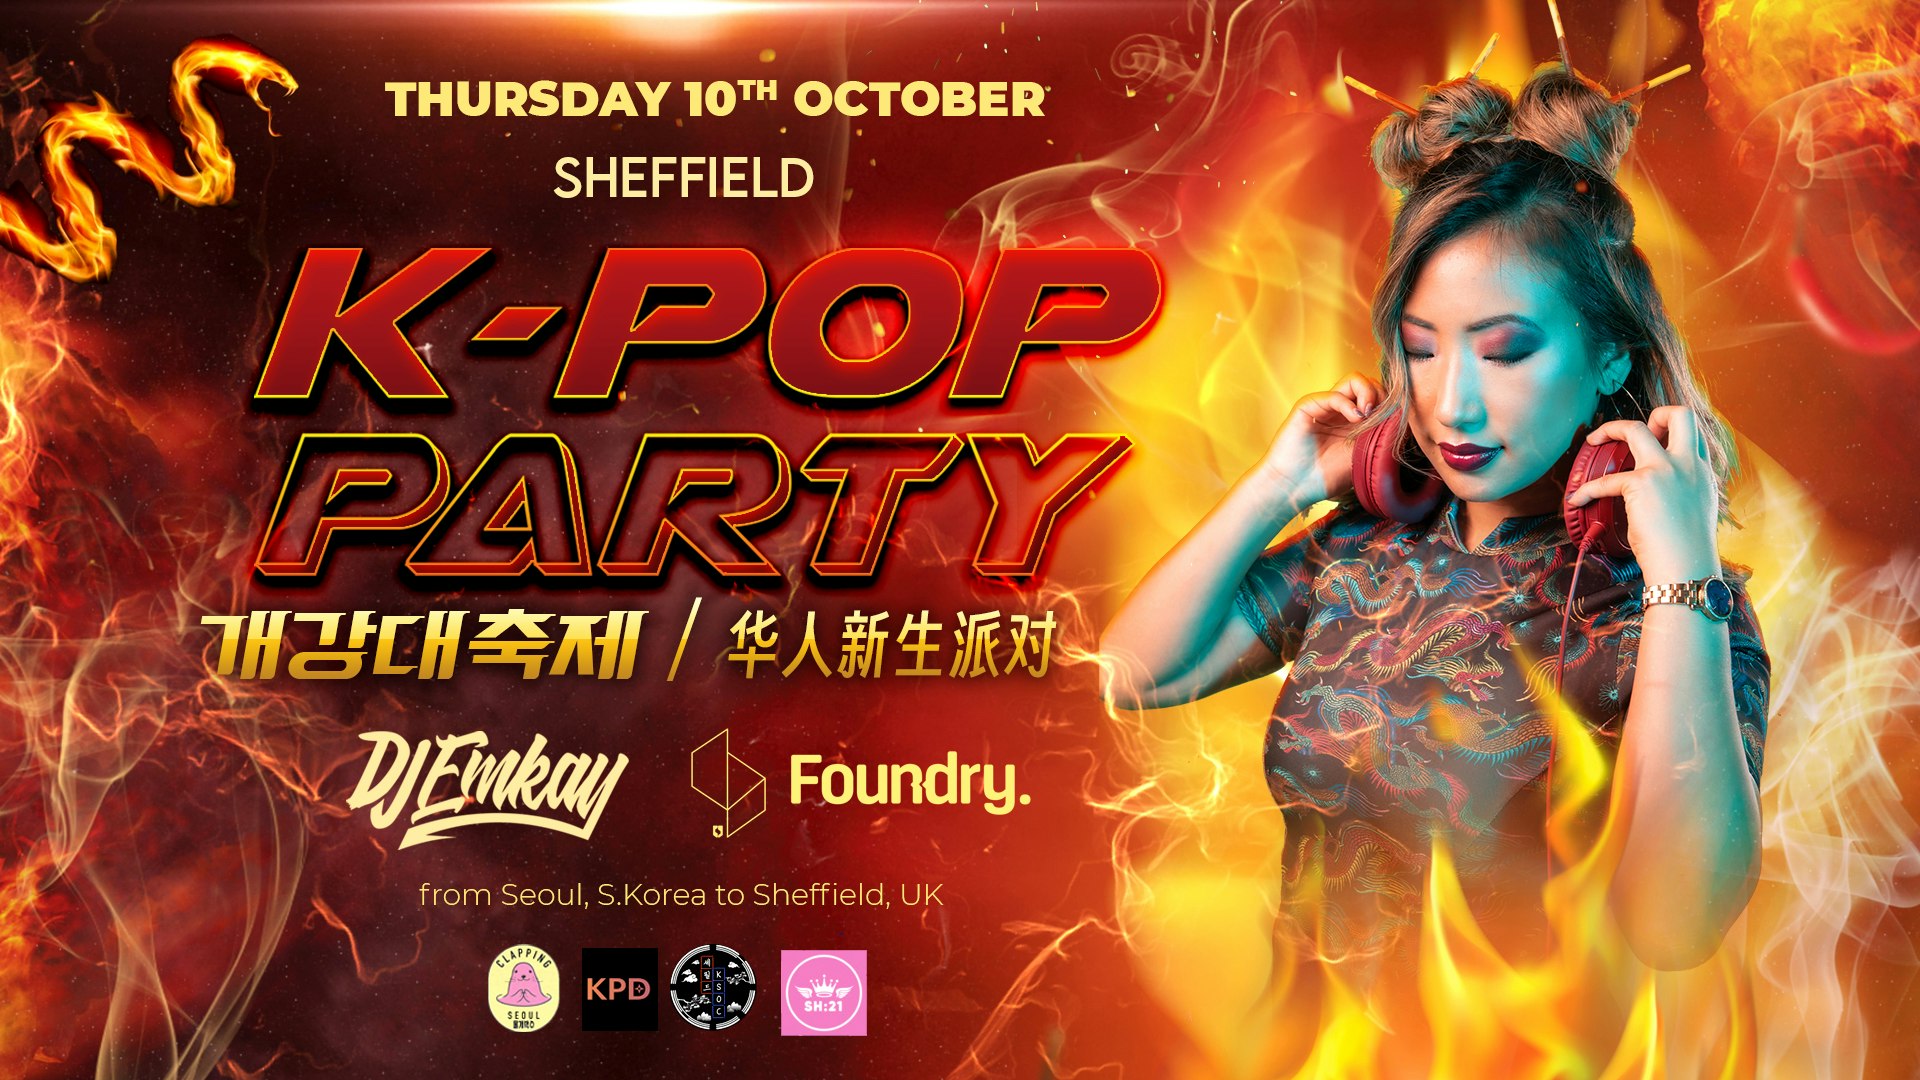 Sheffield K-Pop Party – Fire Tour with DJ EMKAY |  Thursday 10th October